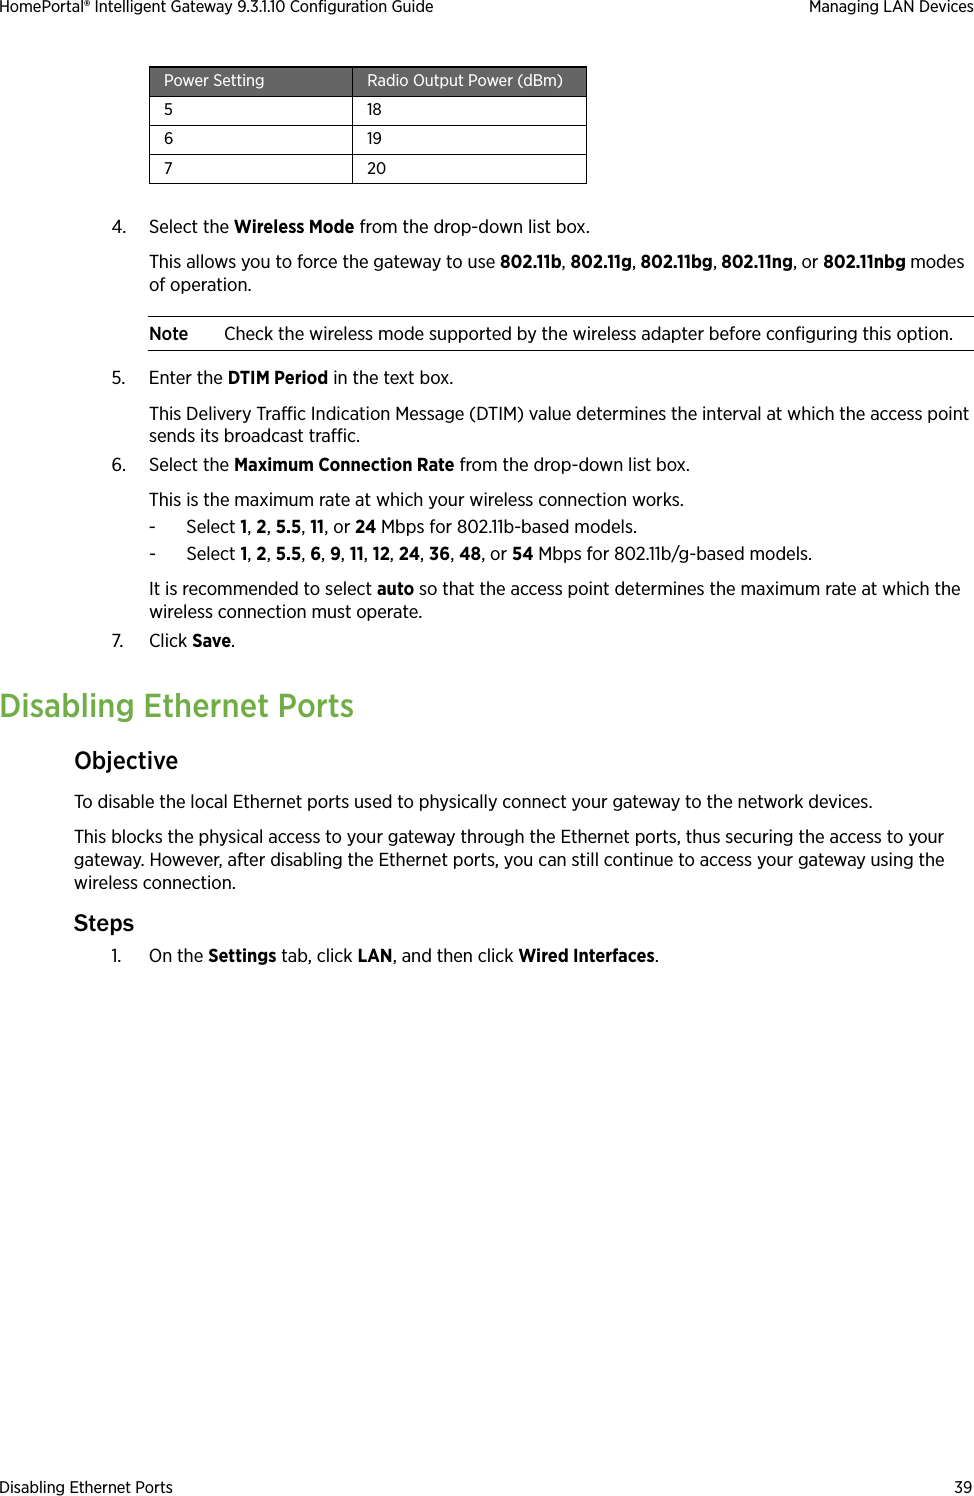 Disabling Ethernet Ports 39HomePortal® Intelligent Gateway 9.3.1.10 Configuration Guide Managing LAN Devices4. Select the Wireless Mode from the drop-down list box. This allows you to force the gateway to use 802.11b, 802.11g, 802.11bg, 802.11ng, or 802.11nbg modes of operation. Note Check the wireless mode supported by the wireless adapter before configuring this option.5. Enter the DTIM Period in the text box. This Delivery Traffic Indication Message (DTIM) value determines the interval at which the access point sends its broadcast traffic.6. Select the Maximum Connection Rate from the drop-down list box. This is the maximum rate at which your wireless connection works. - Select 1, 2, 5.5, 11, or 24 Mbps for 802.11b-based models. - Select 1, 2, 5.5, 6, 9, 11, 12, 24, 36, 48, or 54 Mbps for 802.11b/g-based models. It is recommended to select auto so that the access point determines the maximum rate at which the wireless connection must operate.7. Click Save.Disabling Ethernet PortsObjectiveTo disable the local Ethernet ports used to physically connect your gateway to the network devices. This blocks the physical access to your gateway through the Ethernet ports, thus securing the access to your gateway. However, after disabling the Ethernet ports, you can still continue to access your gateway using the wireless connection.Steps1. On the Settings tab, click LAN, and then click Wired Interfaces.518619720Power Setting Radio Output Power (dBm)